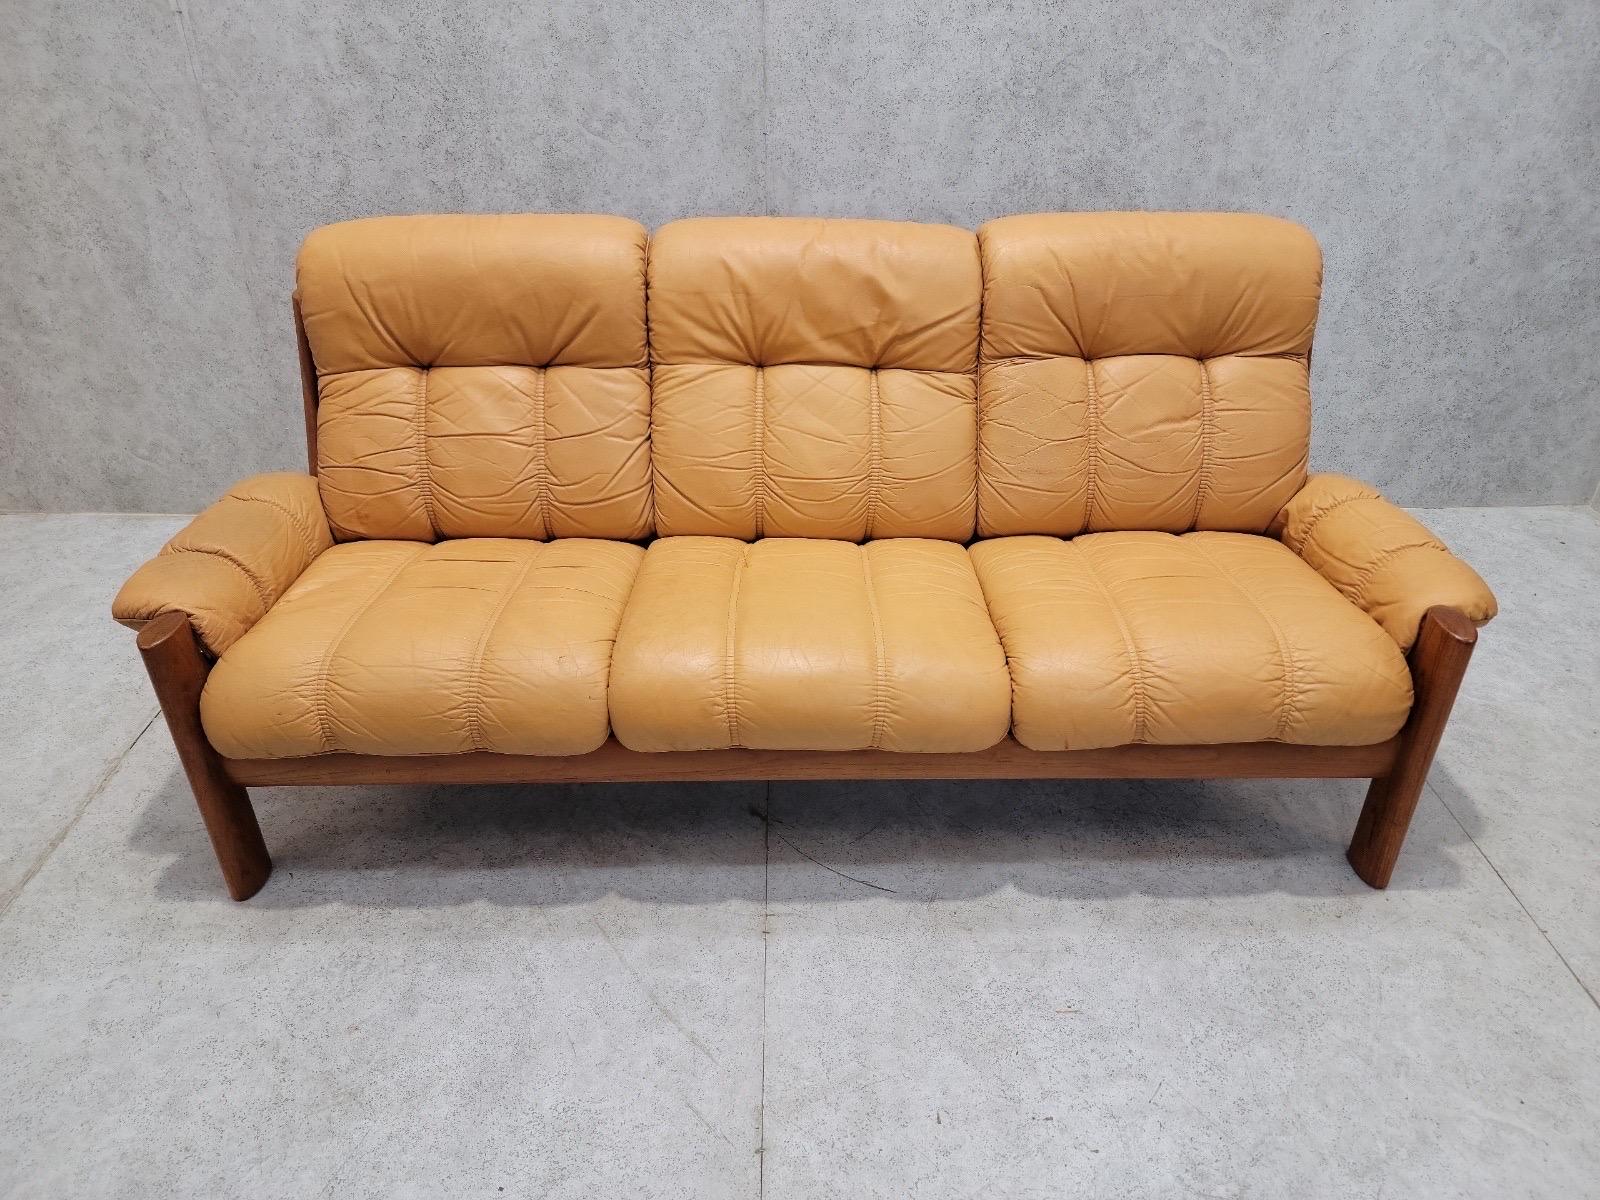 Mid Century Danish Modern Teak & Leather Sofa from Ekornes by Stressless In Good Condition For Sale In Chicago, IL